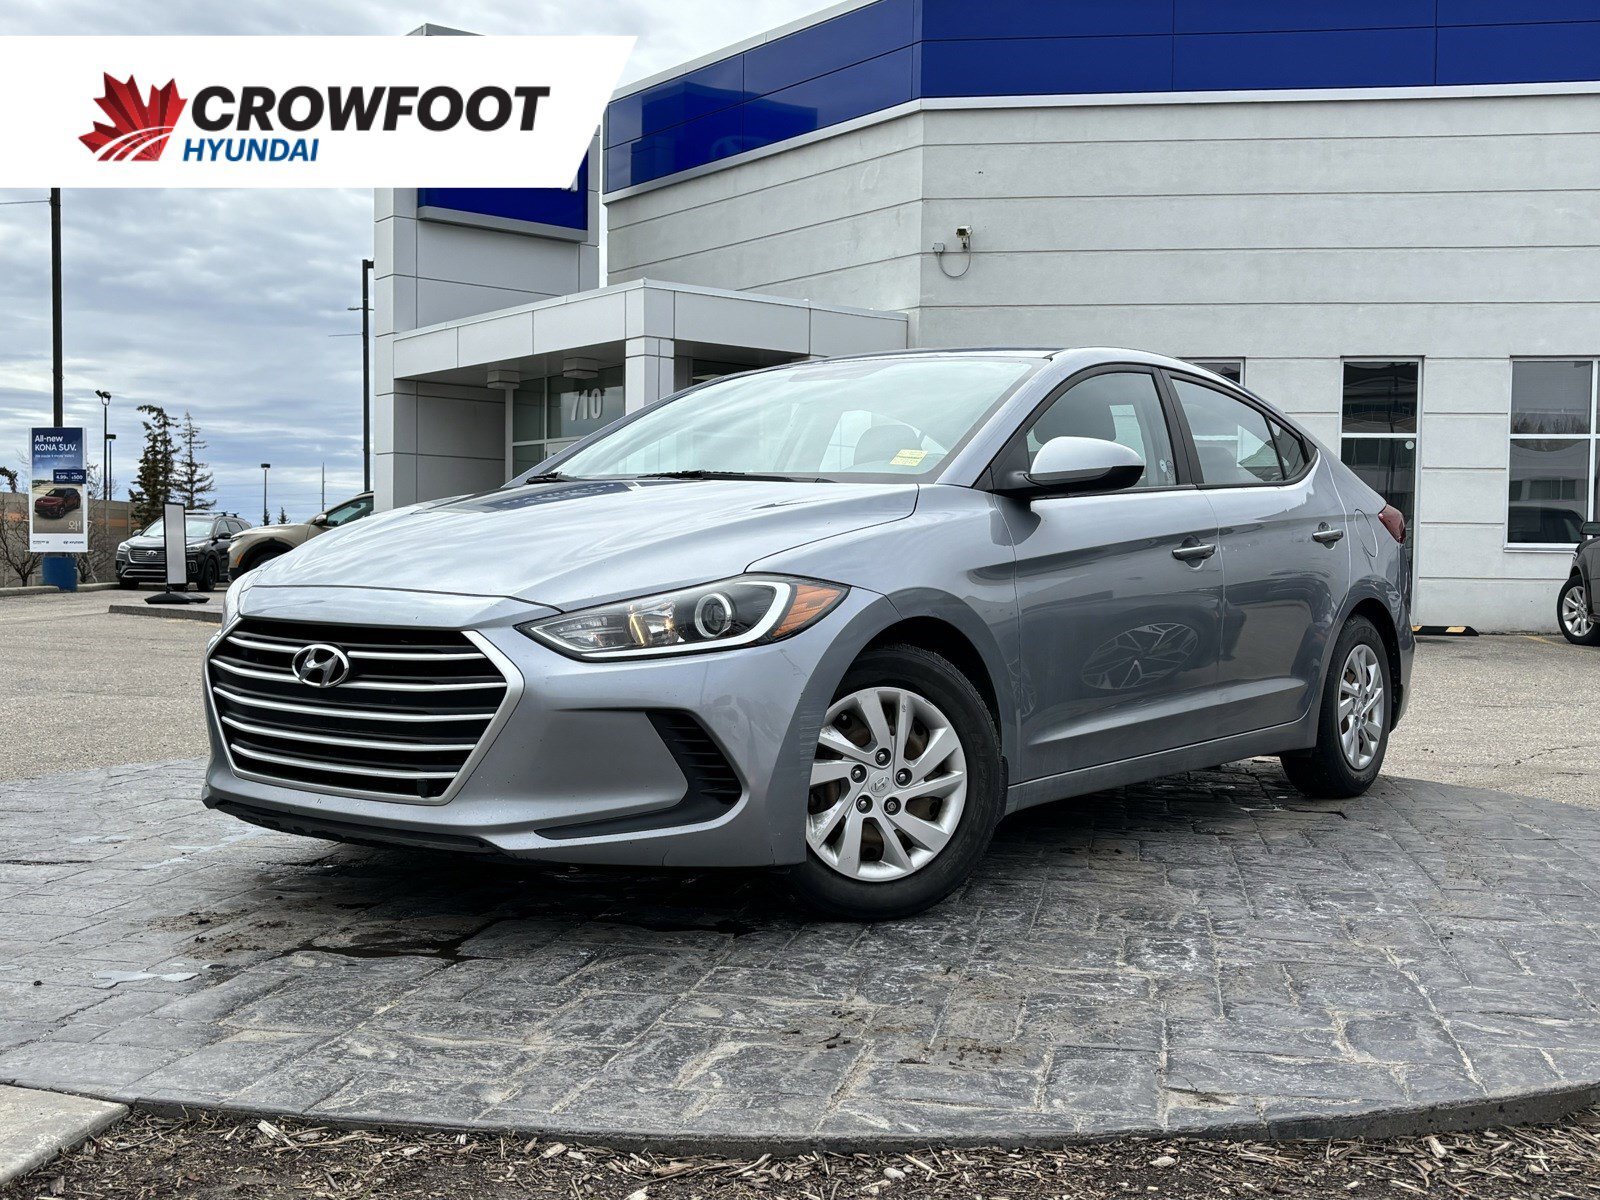 2017 Hyundai Elantra LE - One Owner, Remote Start, Rubber Mats, Heated 